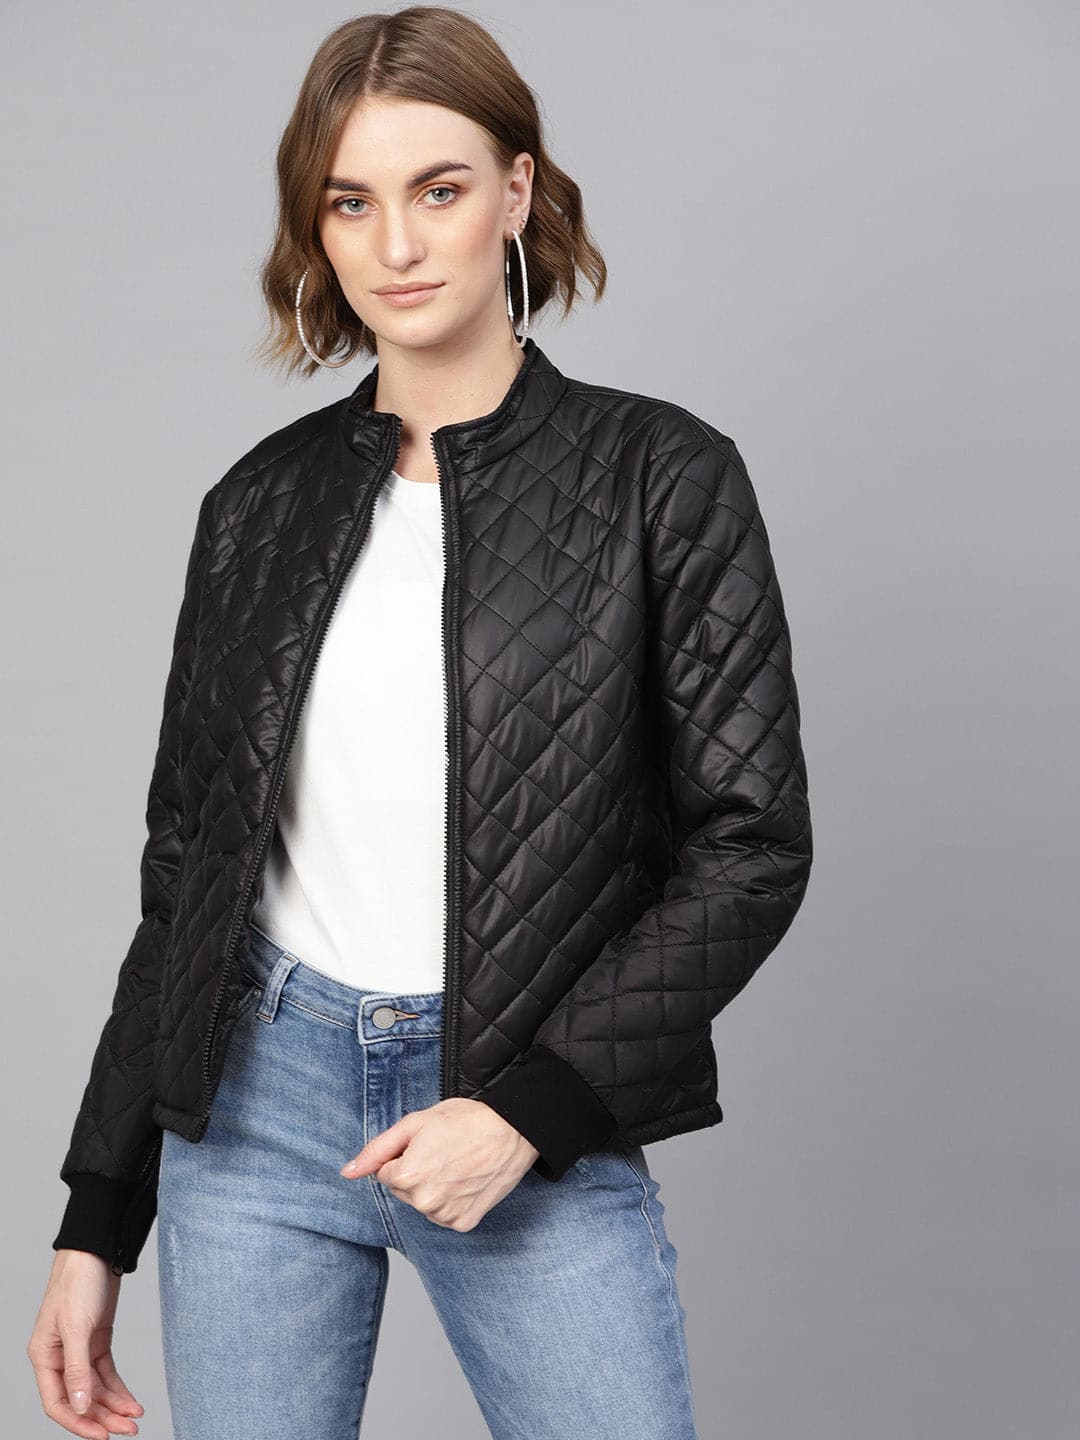 Black Quilted Jacket With Zip On Sleeves-Jackets-SASSAFRAS